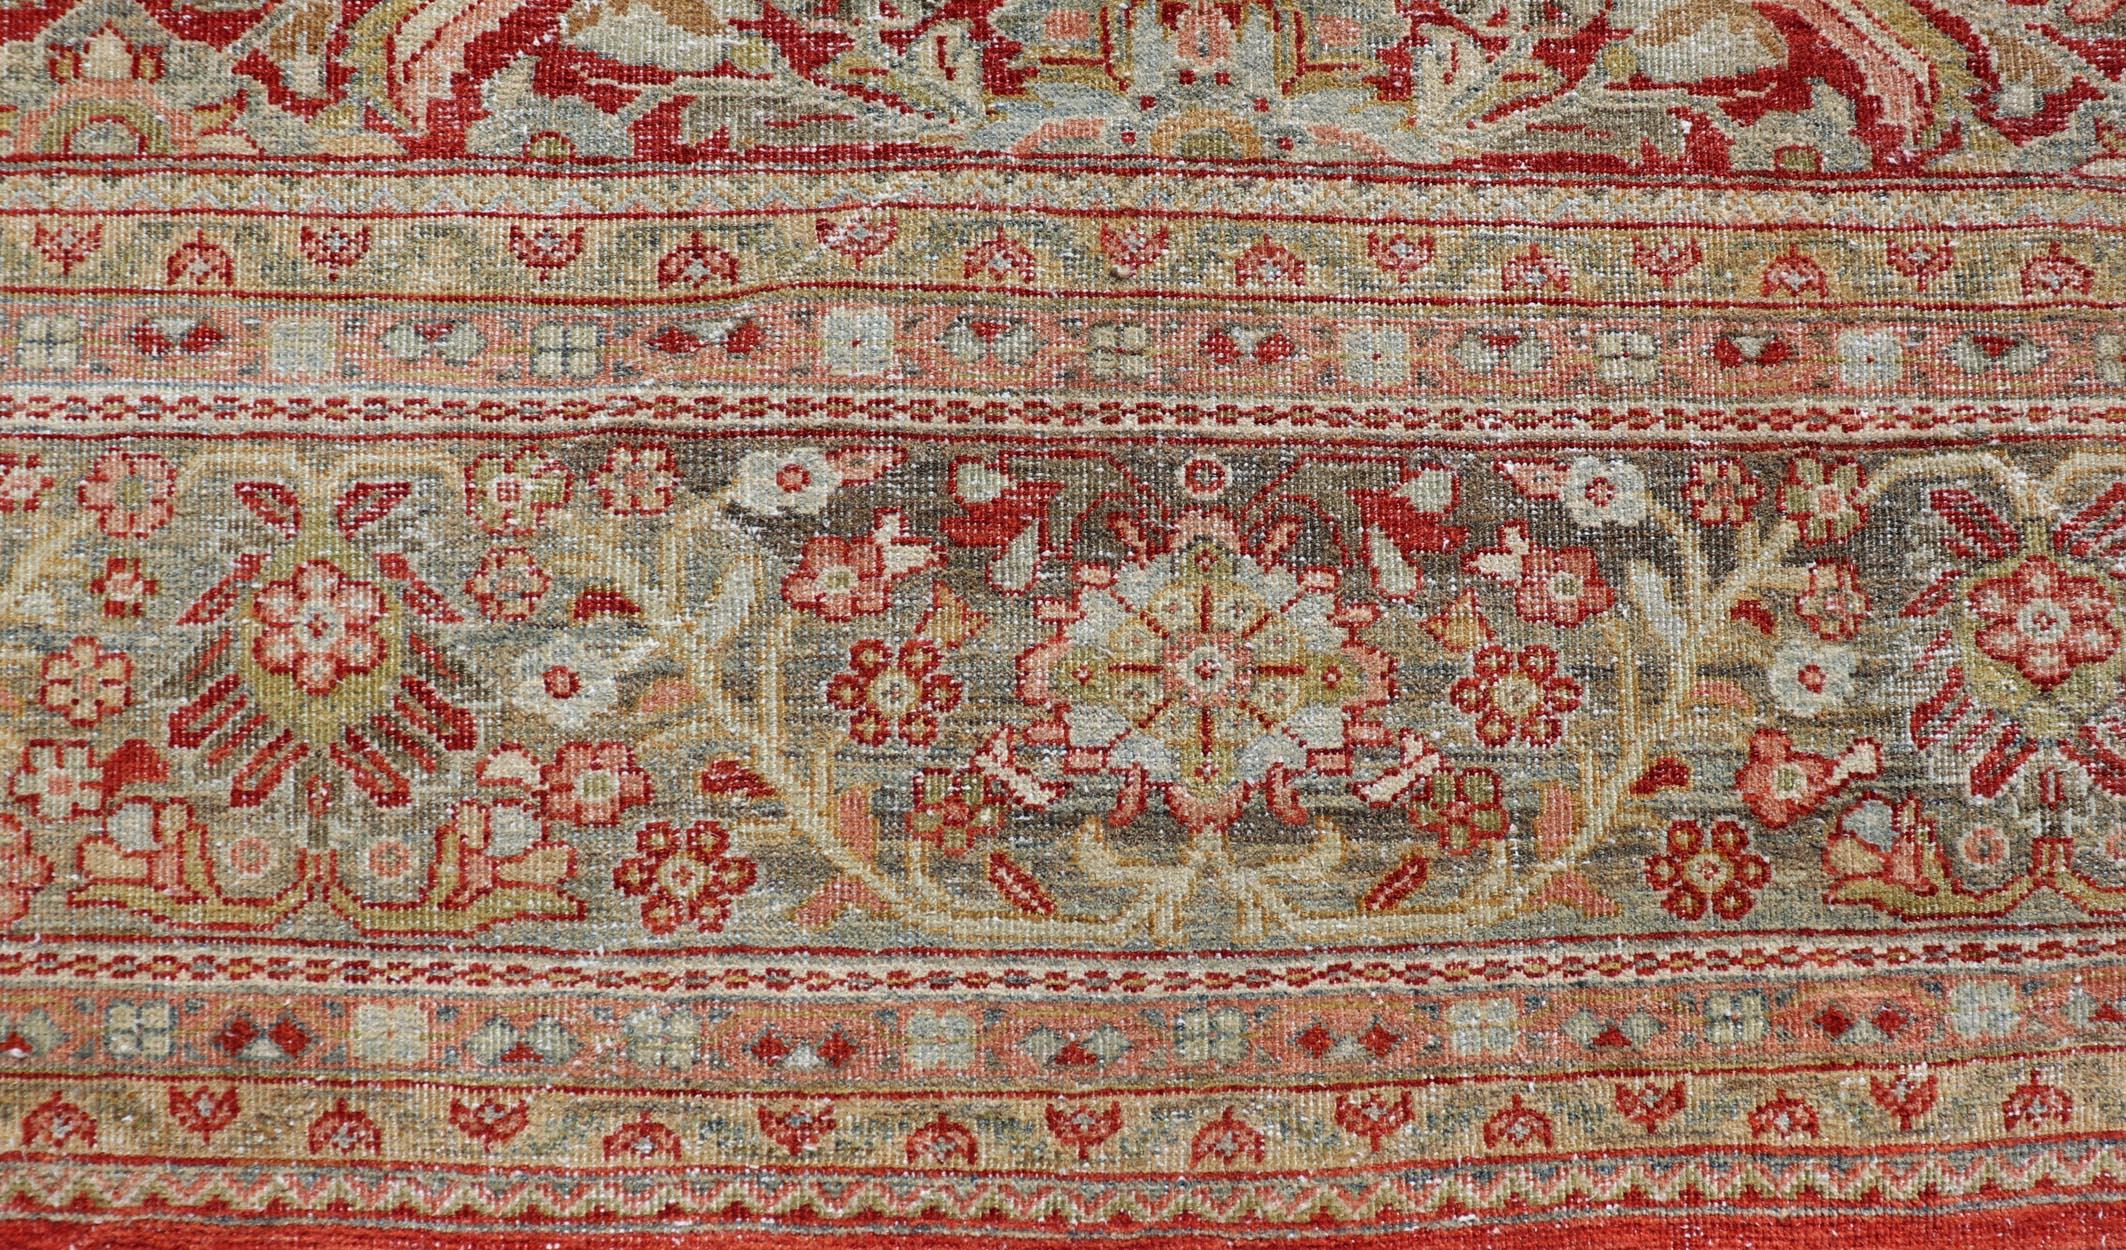 Antique Large Persian Colorful Sultanabad Mahal Rug with All Over Floral Design For Sale 4